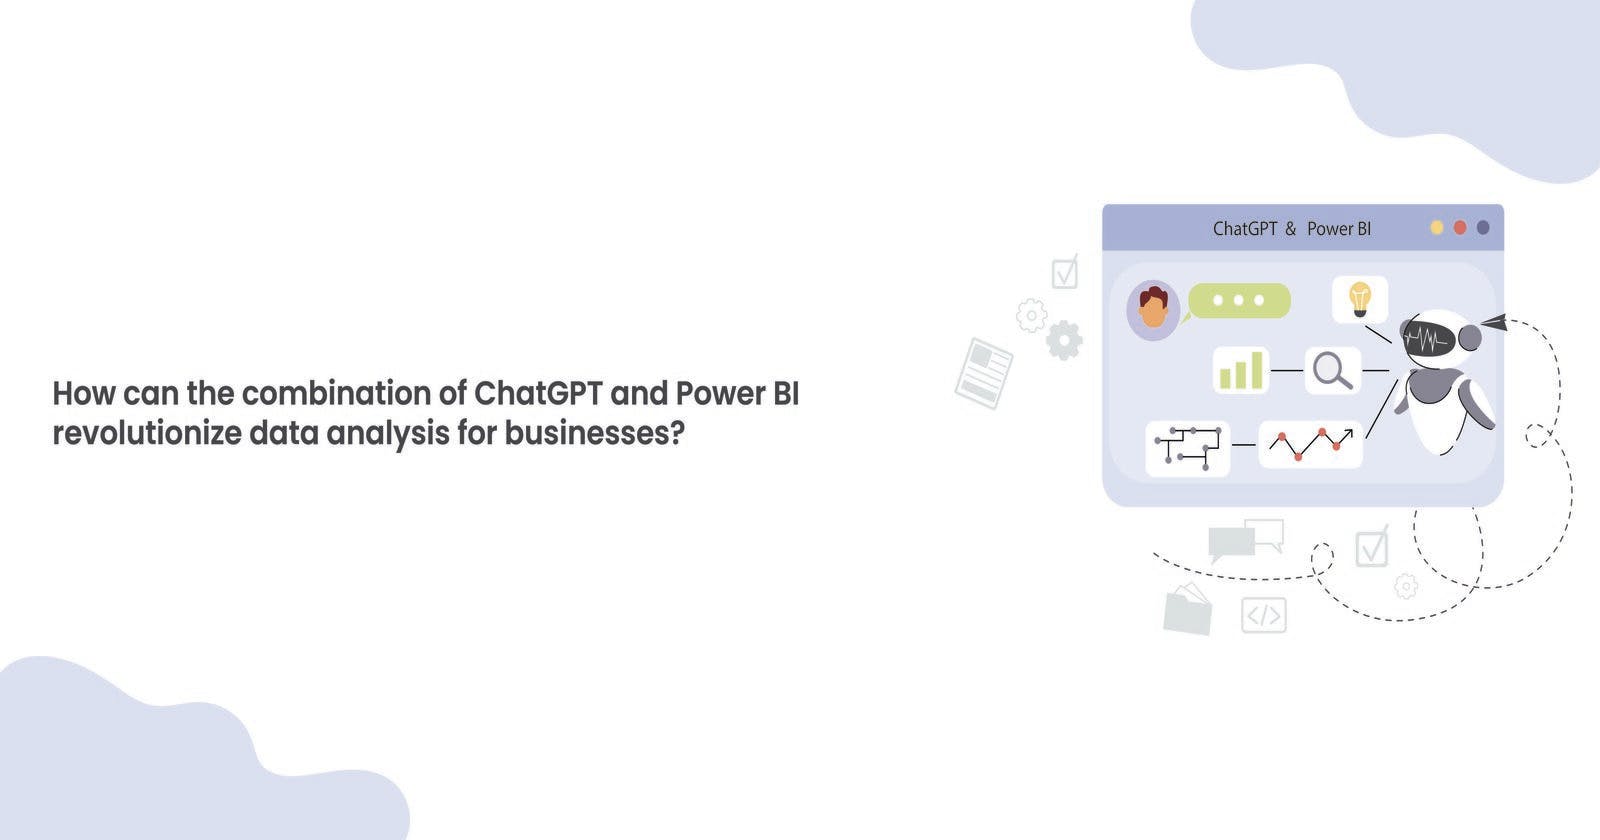 How Can the Combination of ChatGPT and Power BI Revolutionize Data Analysis for Businesses?